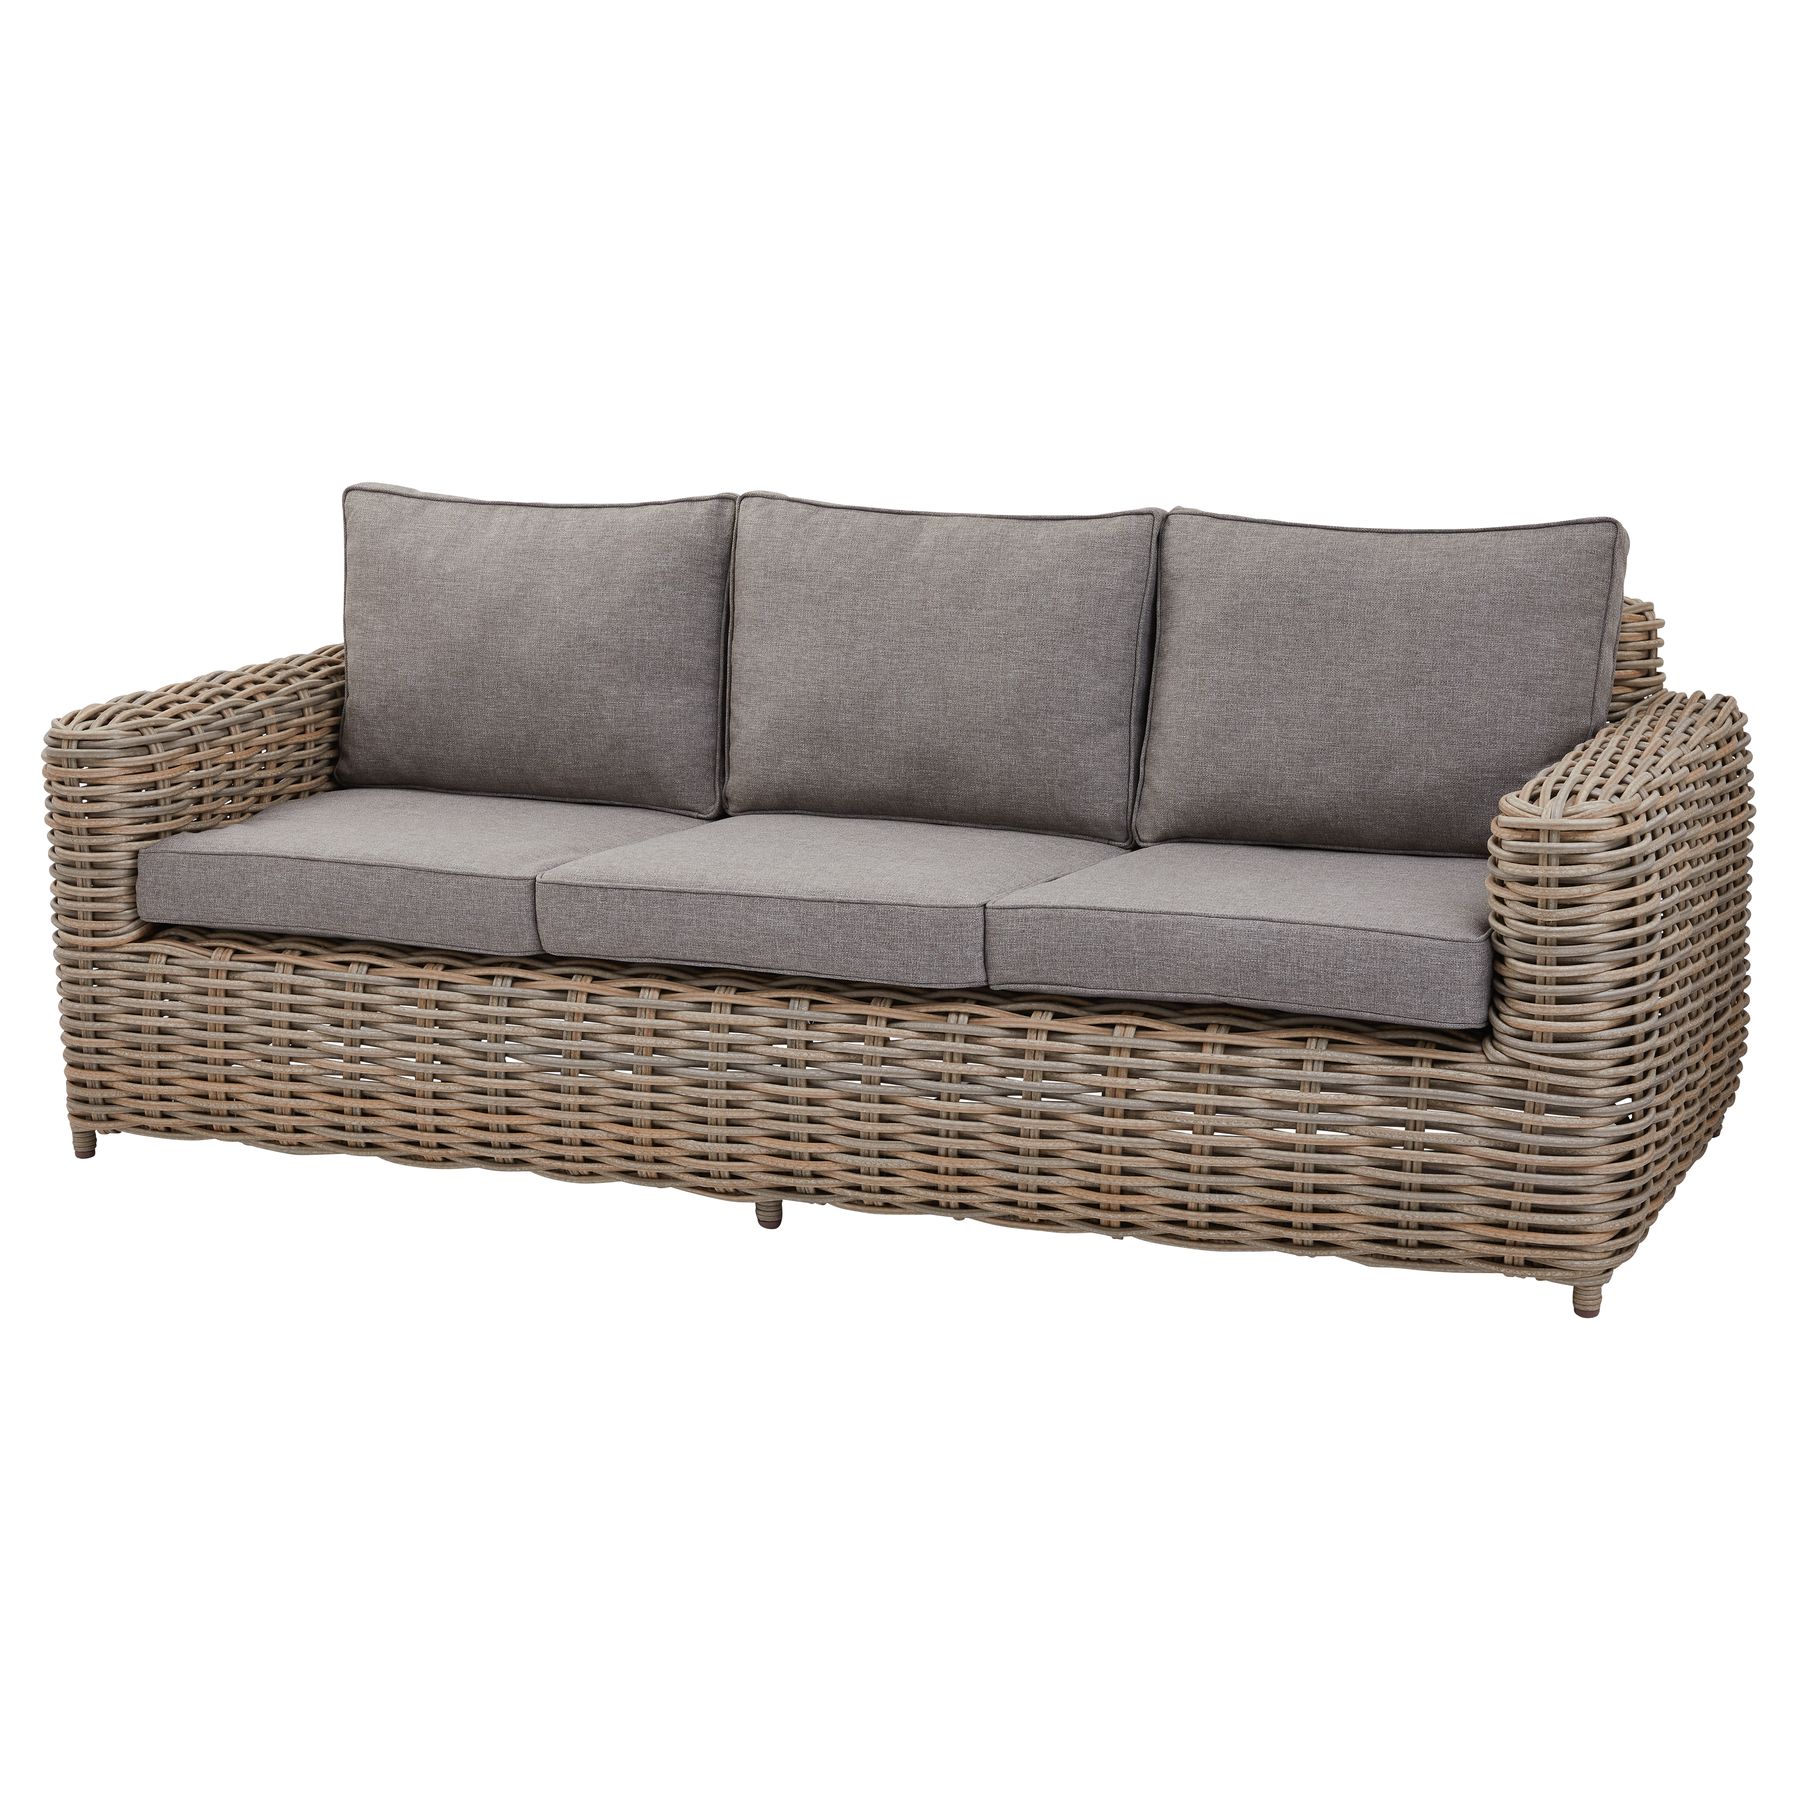 Amalfi Collection Outdoor Five Seater Set - Image 4